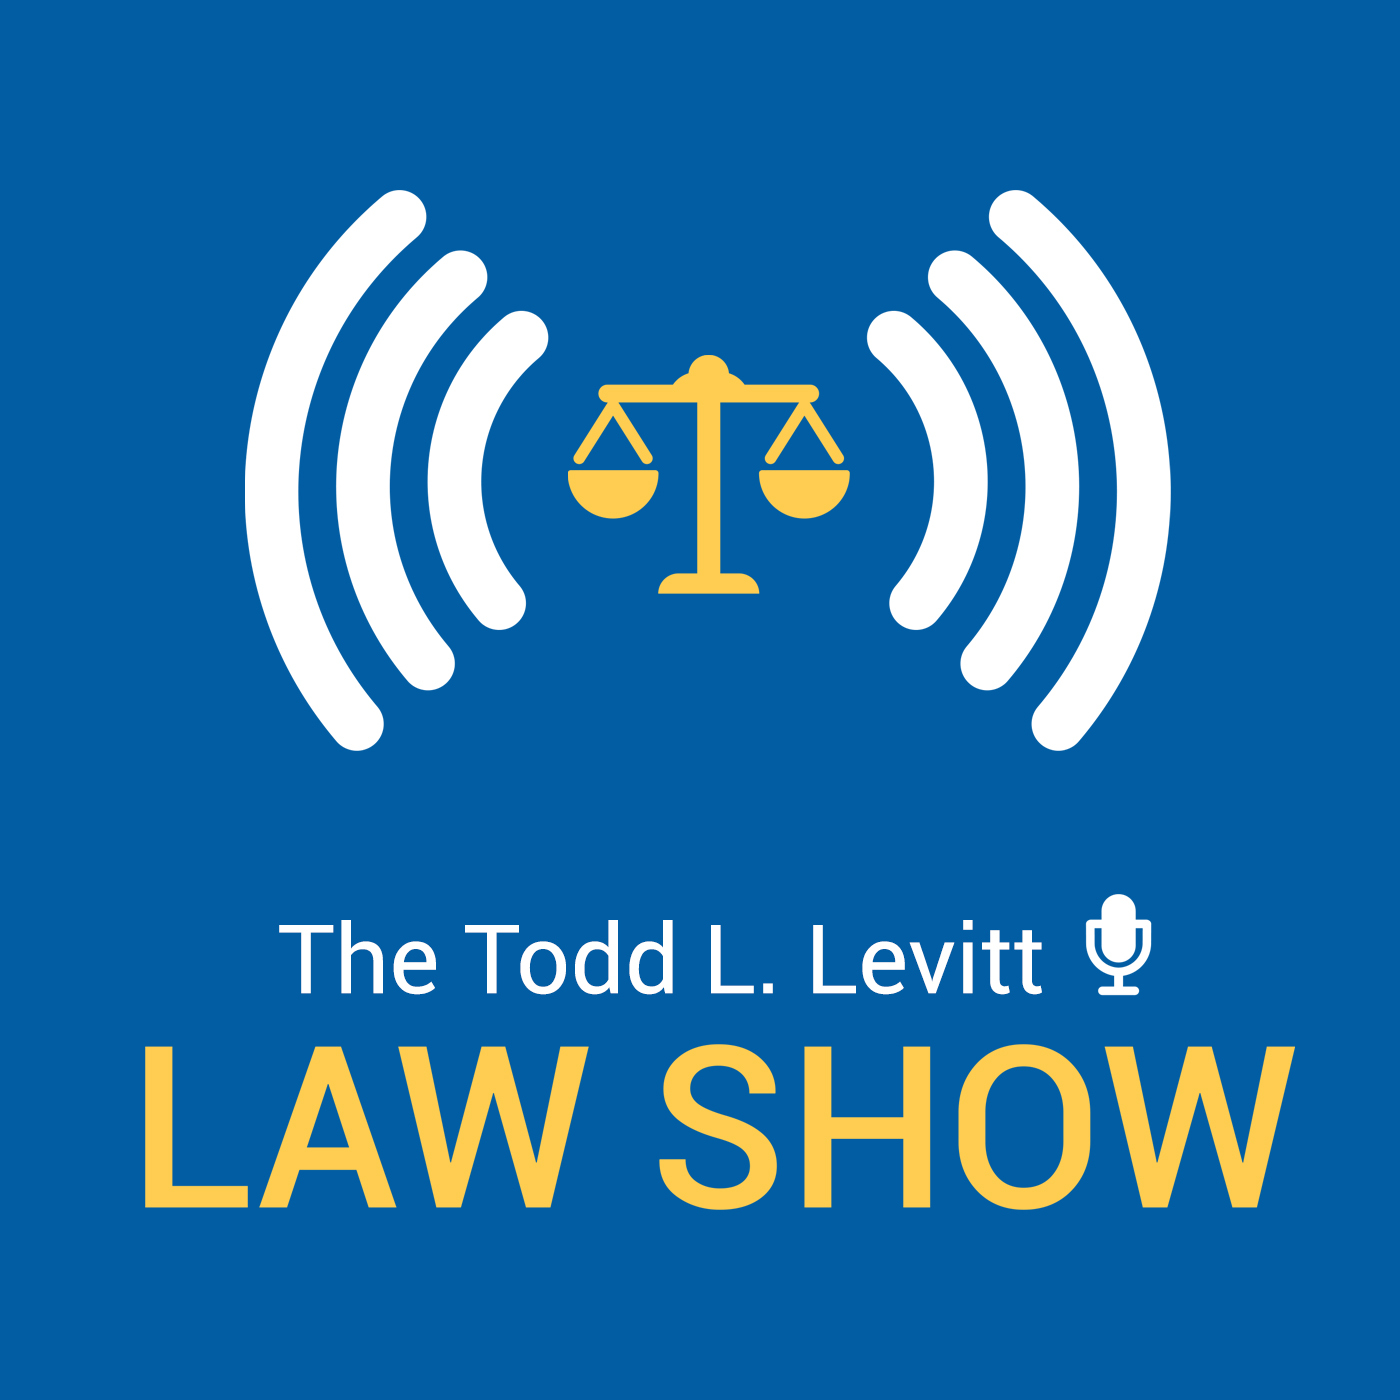 Cannabis! Cannabis! Cannabis, Township Supervisors Allow Licensing, Rock 105 FM, AWESOME EPISODE!